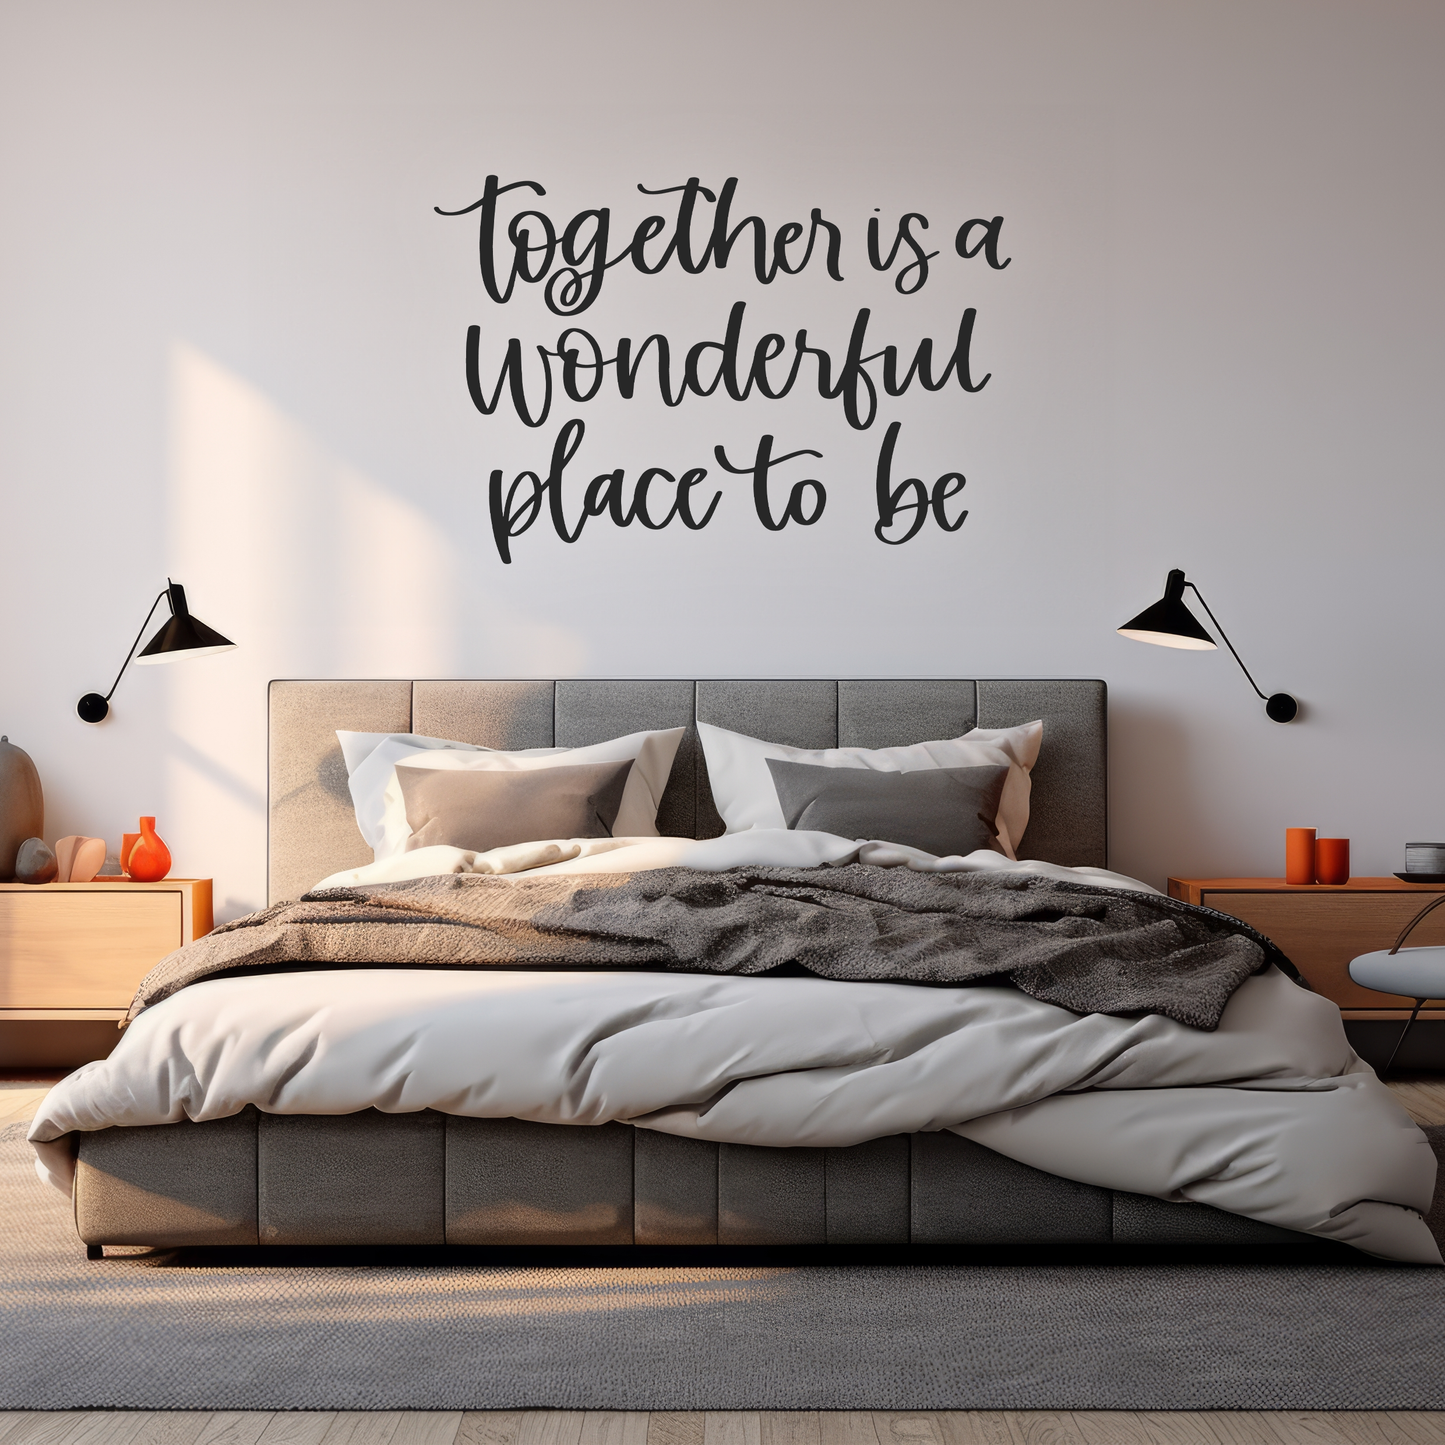 Together is a Wonderful Place to Be Wall Sticker Decal